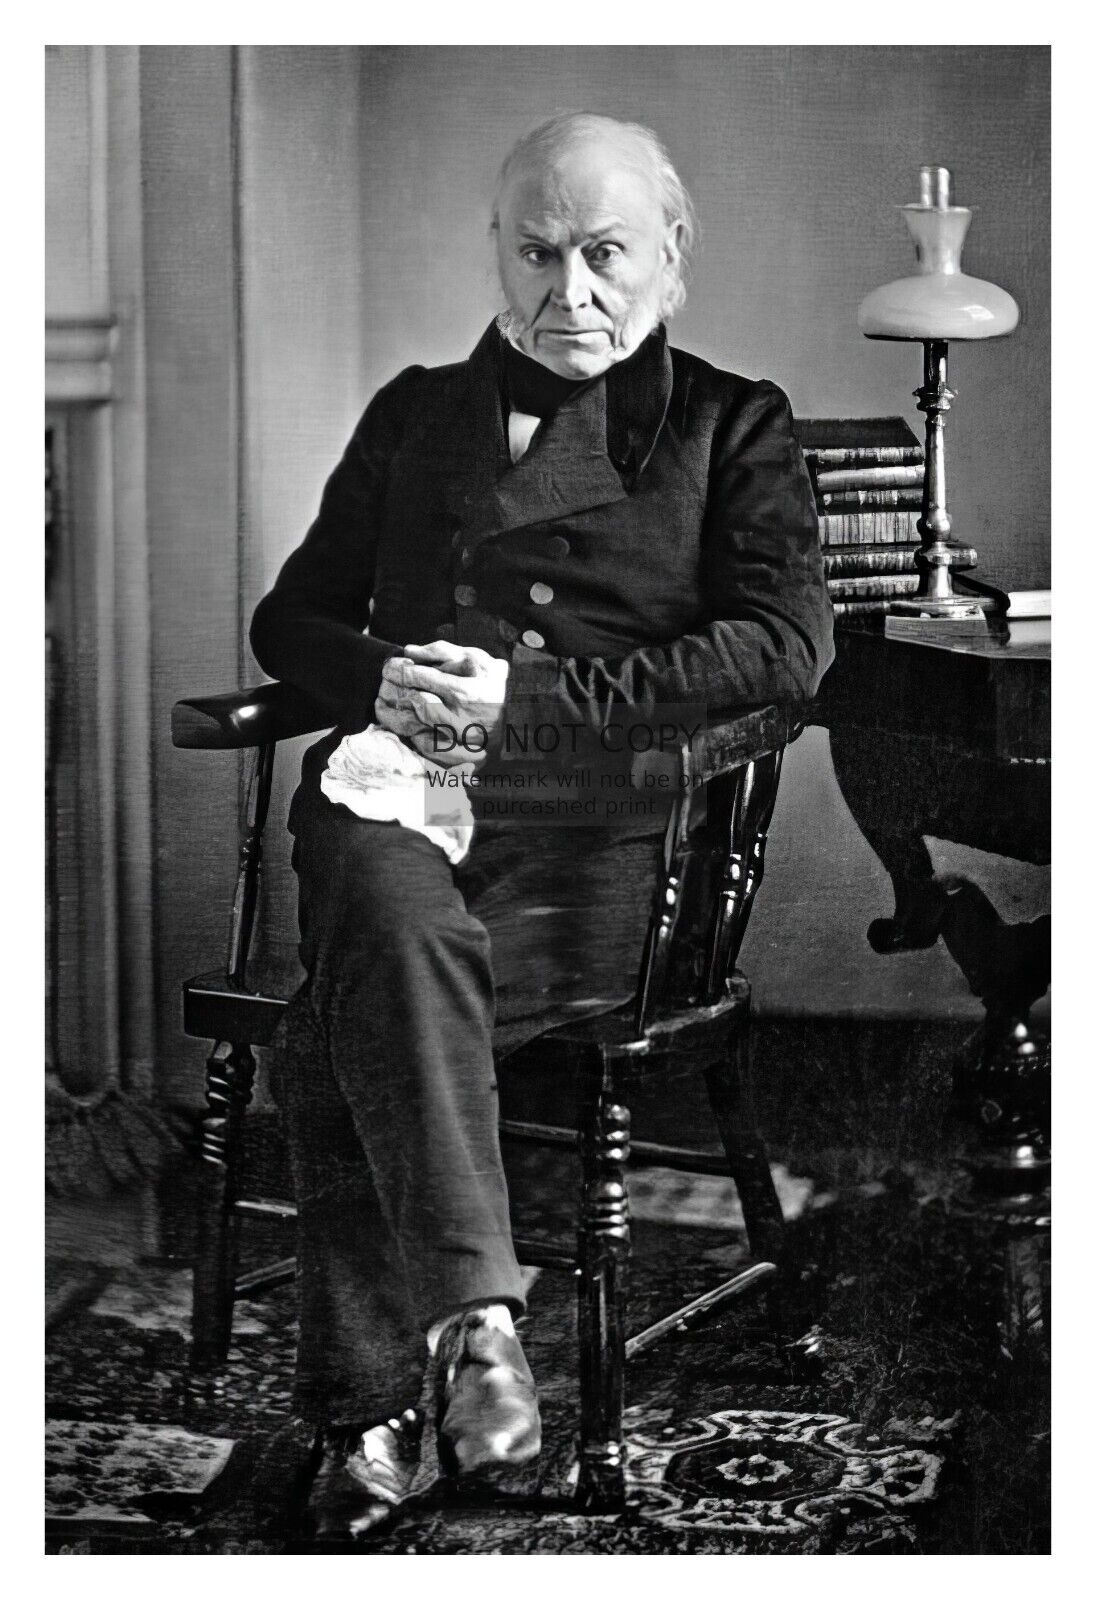 JOHN QUINCY ADAMS 6TH PRESIDENT OF THE UNITED STATES SITTING PORTRAIT 4X6 PHOTO